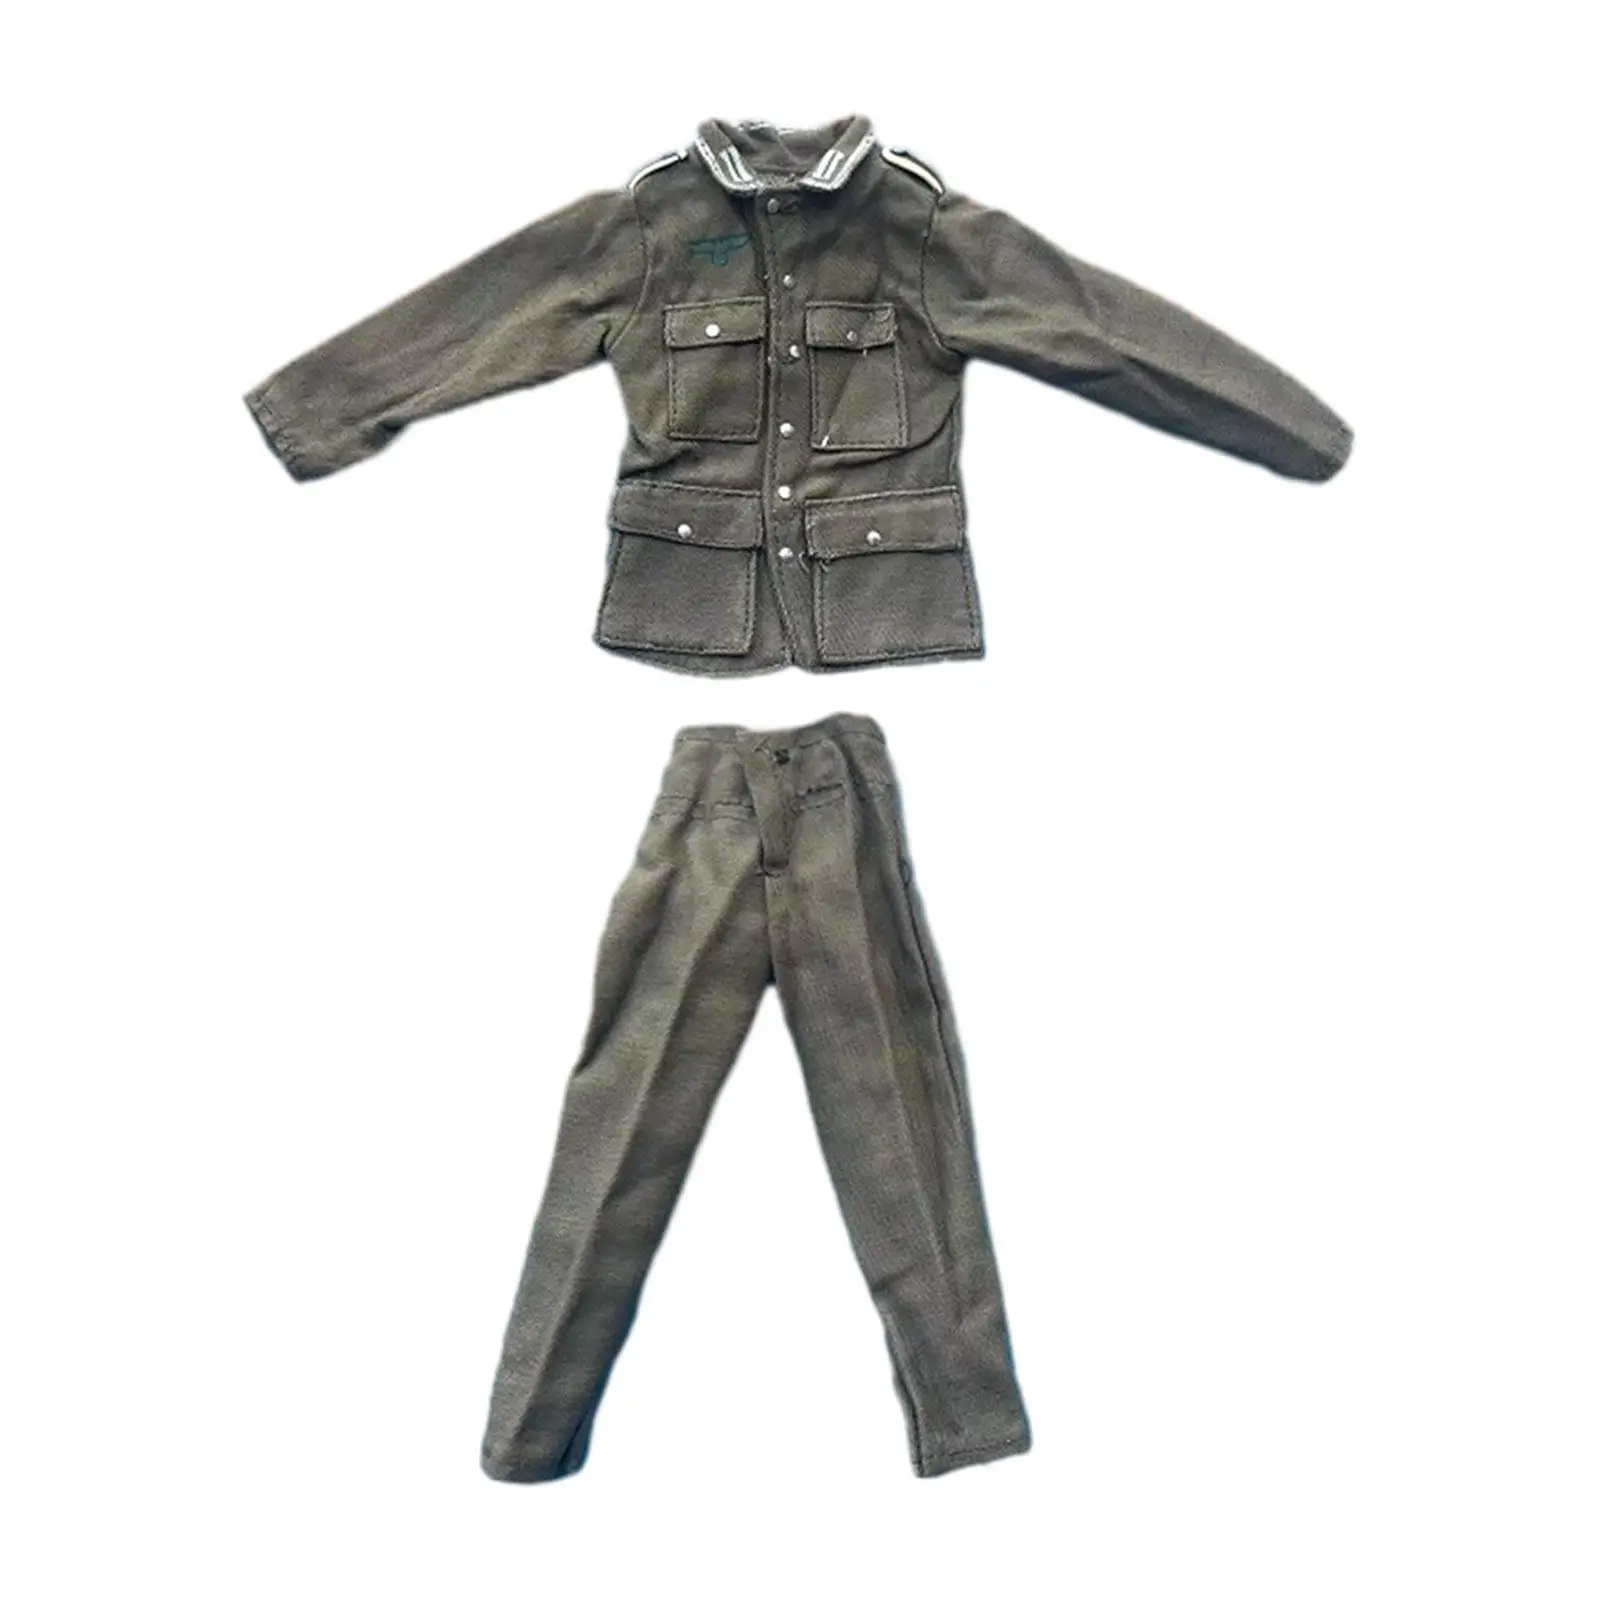 1/6 Male Figure Clothes Jacket and Pants Outfit for 12inch Male Dolls Figure